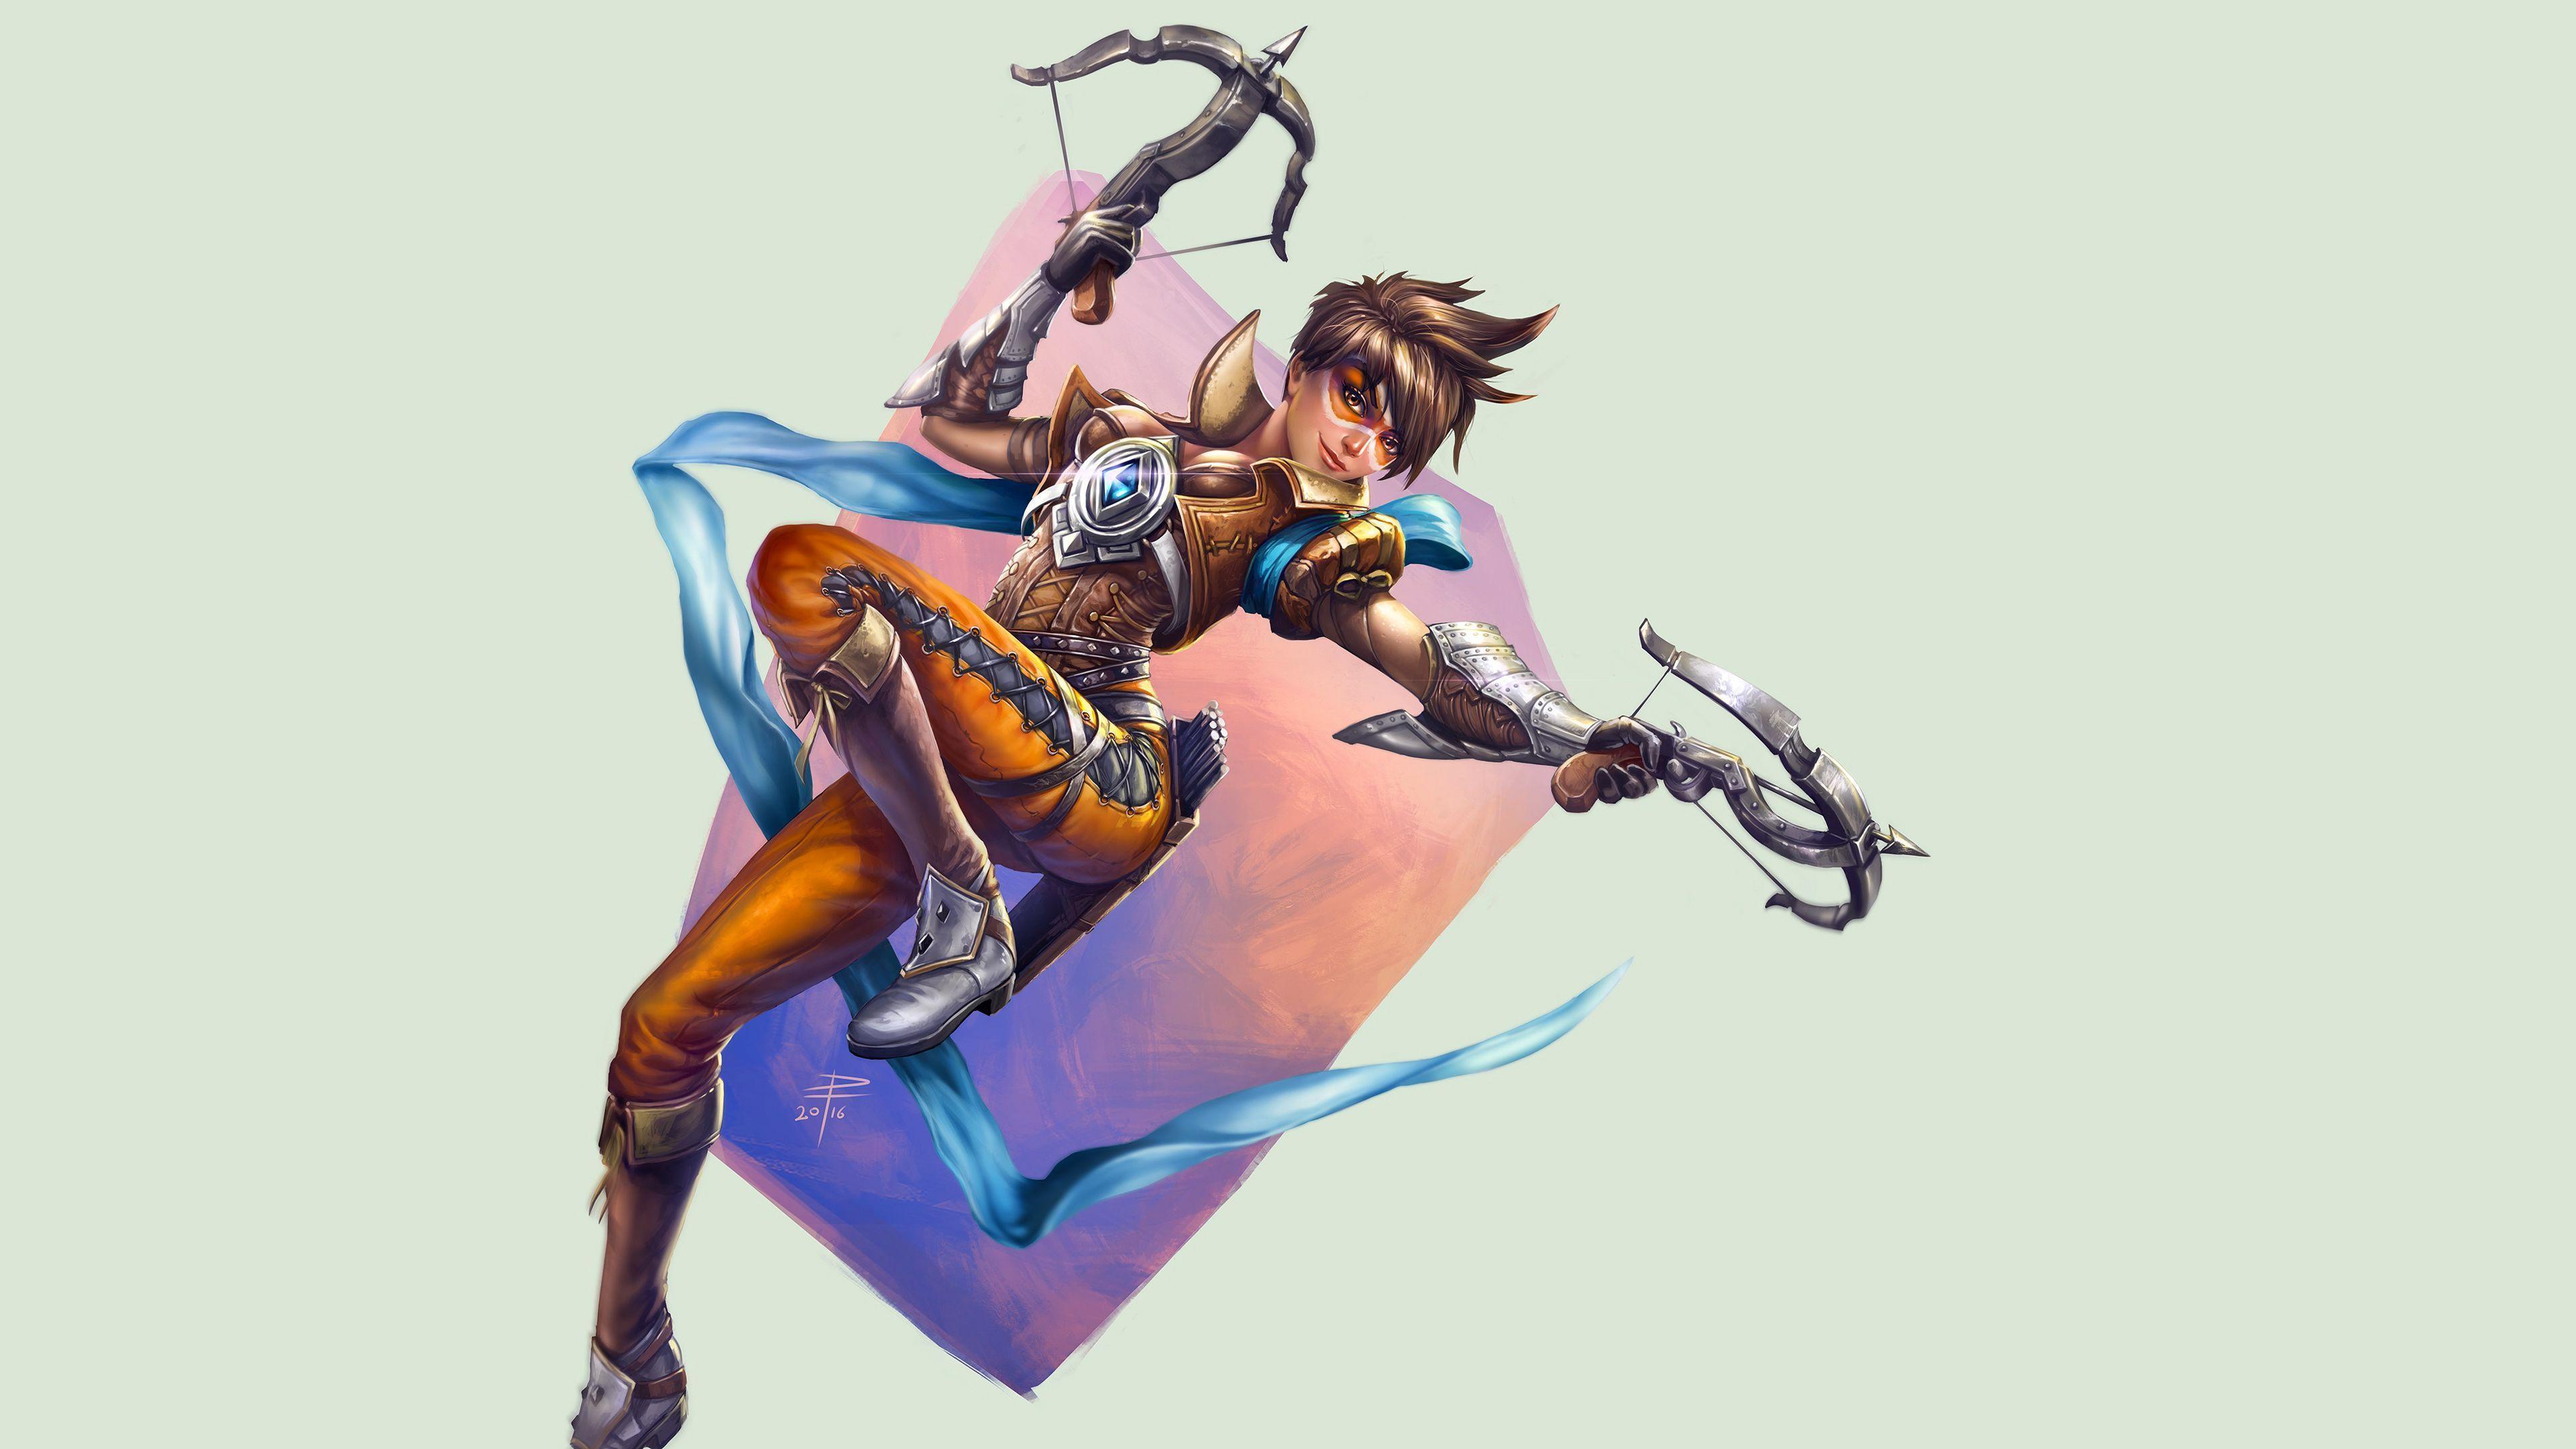 Wallpaper Tagged With TRACER. TRACER HD Wallpaper